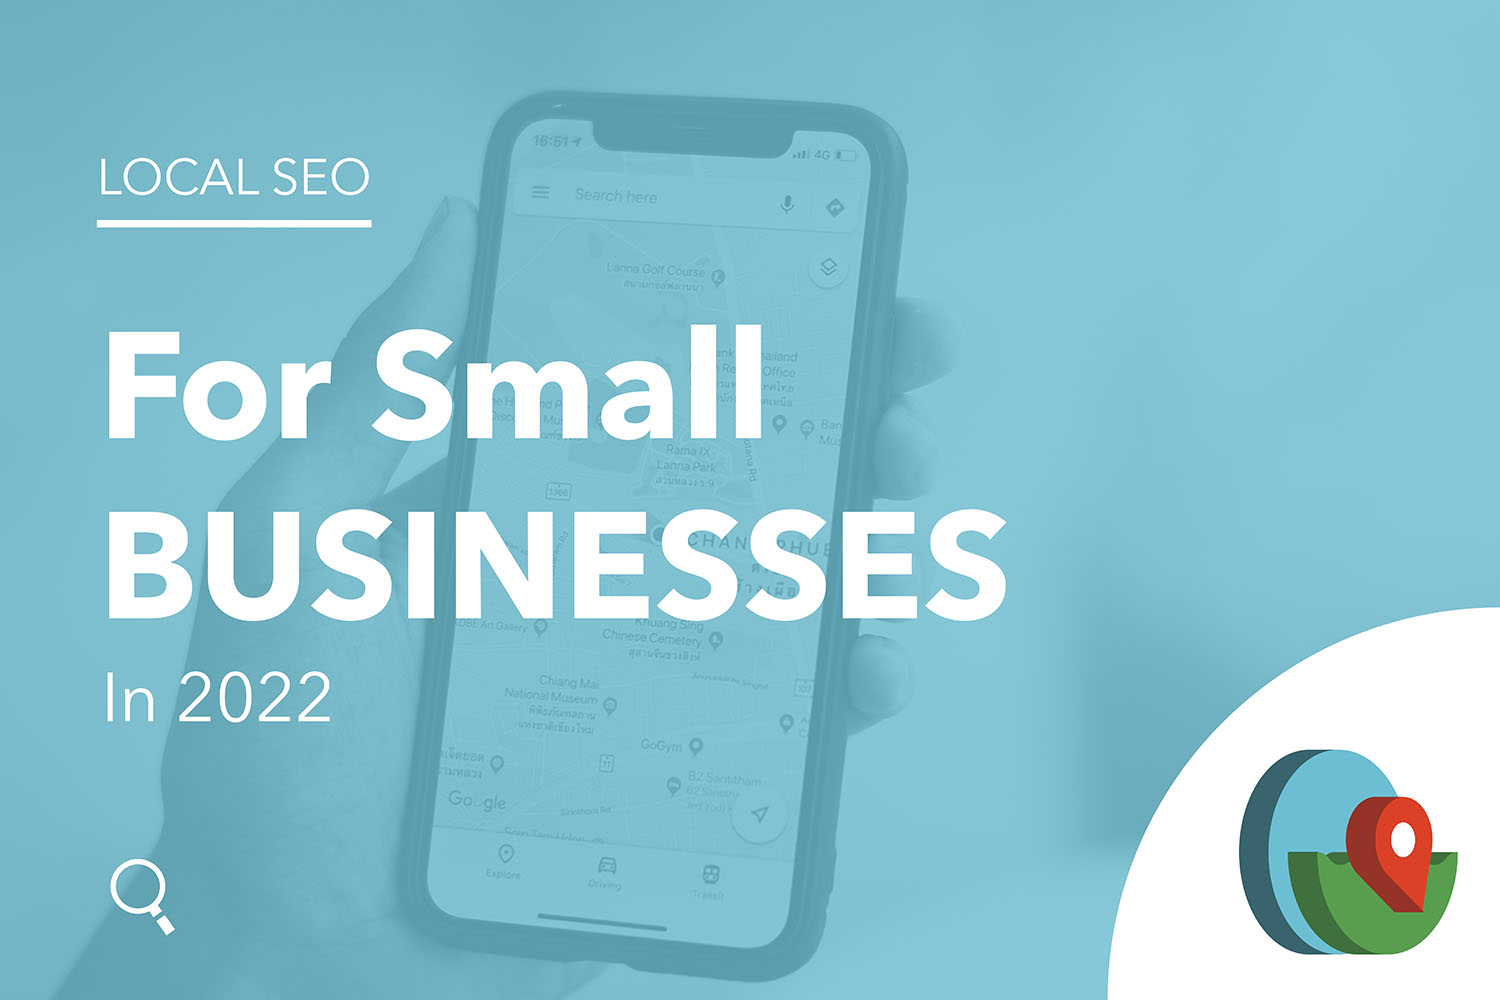 Local SEO for Small Businesses in 2022